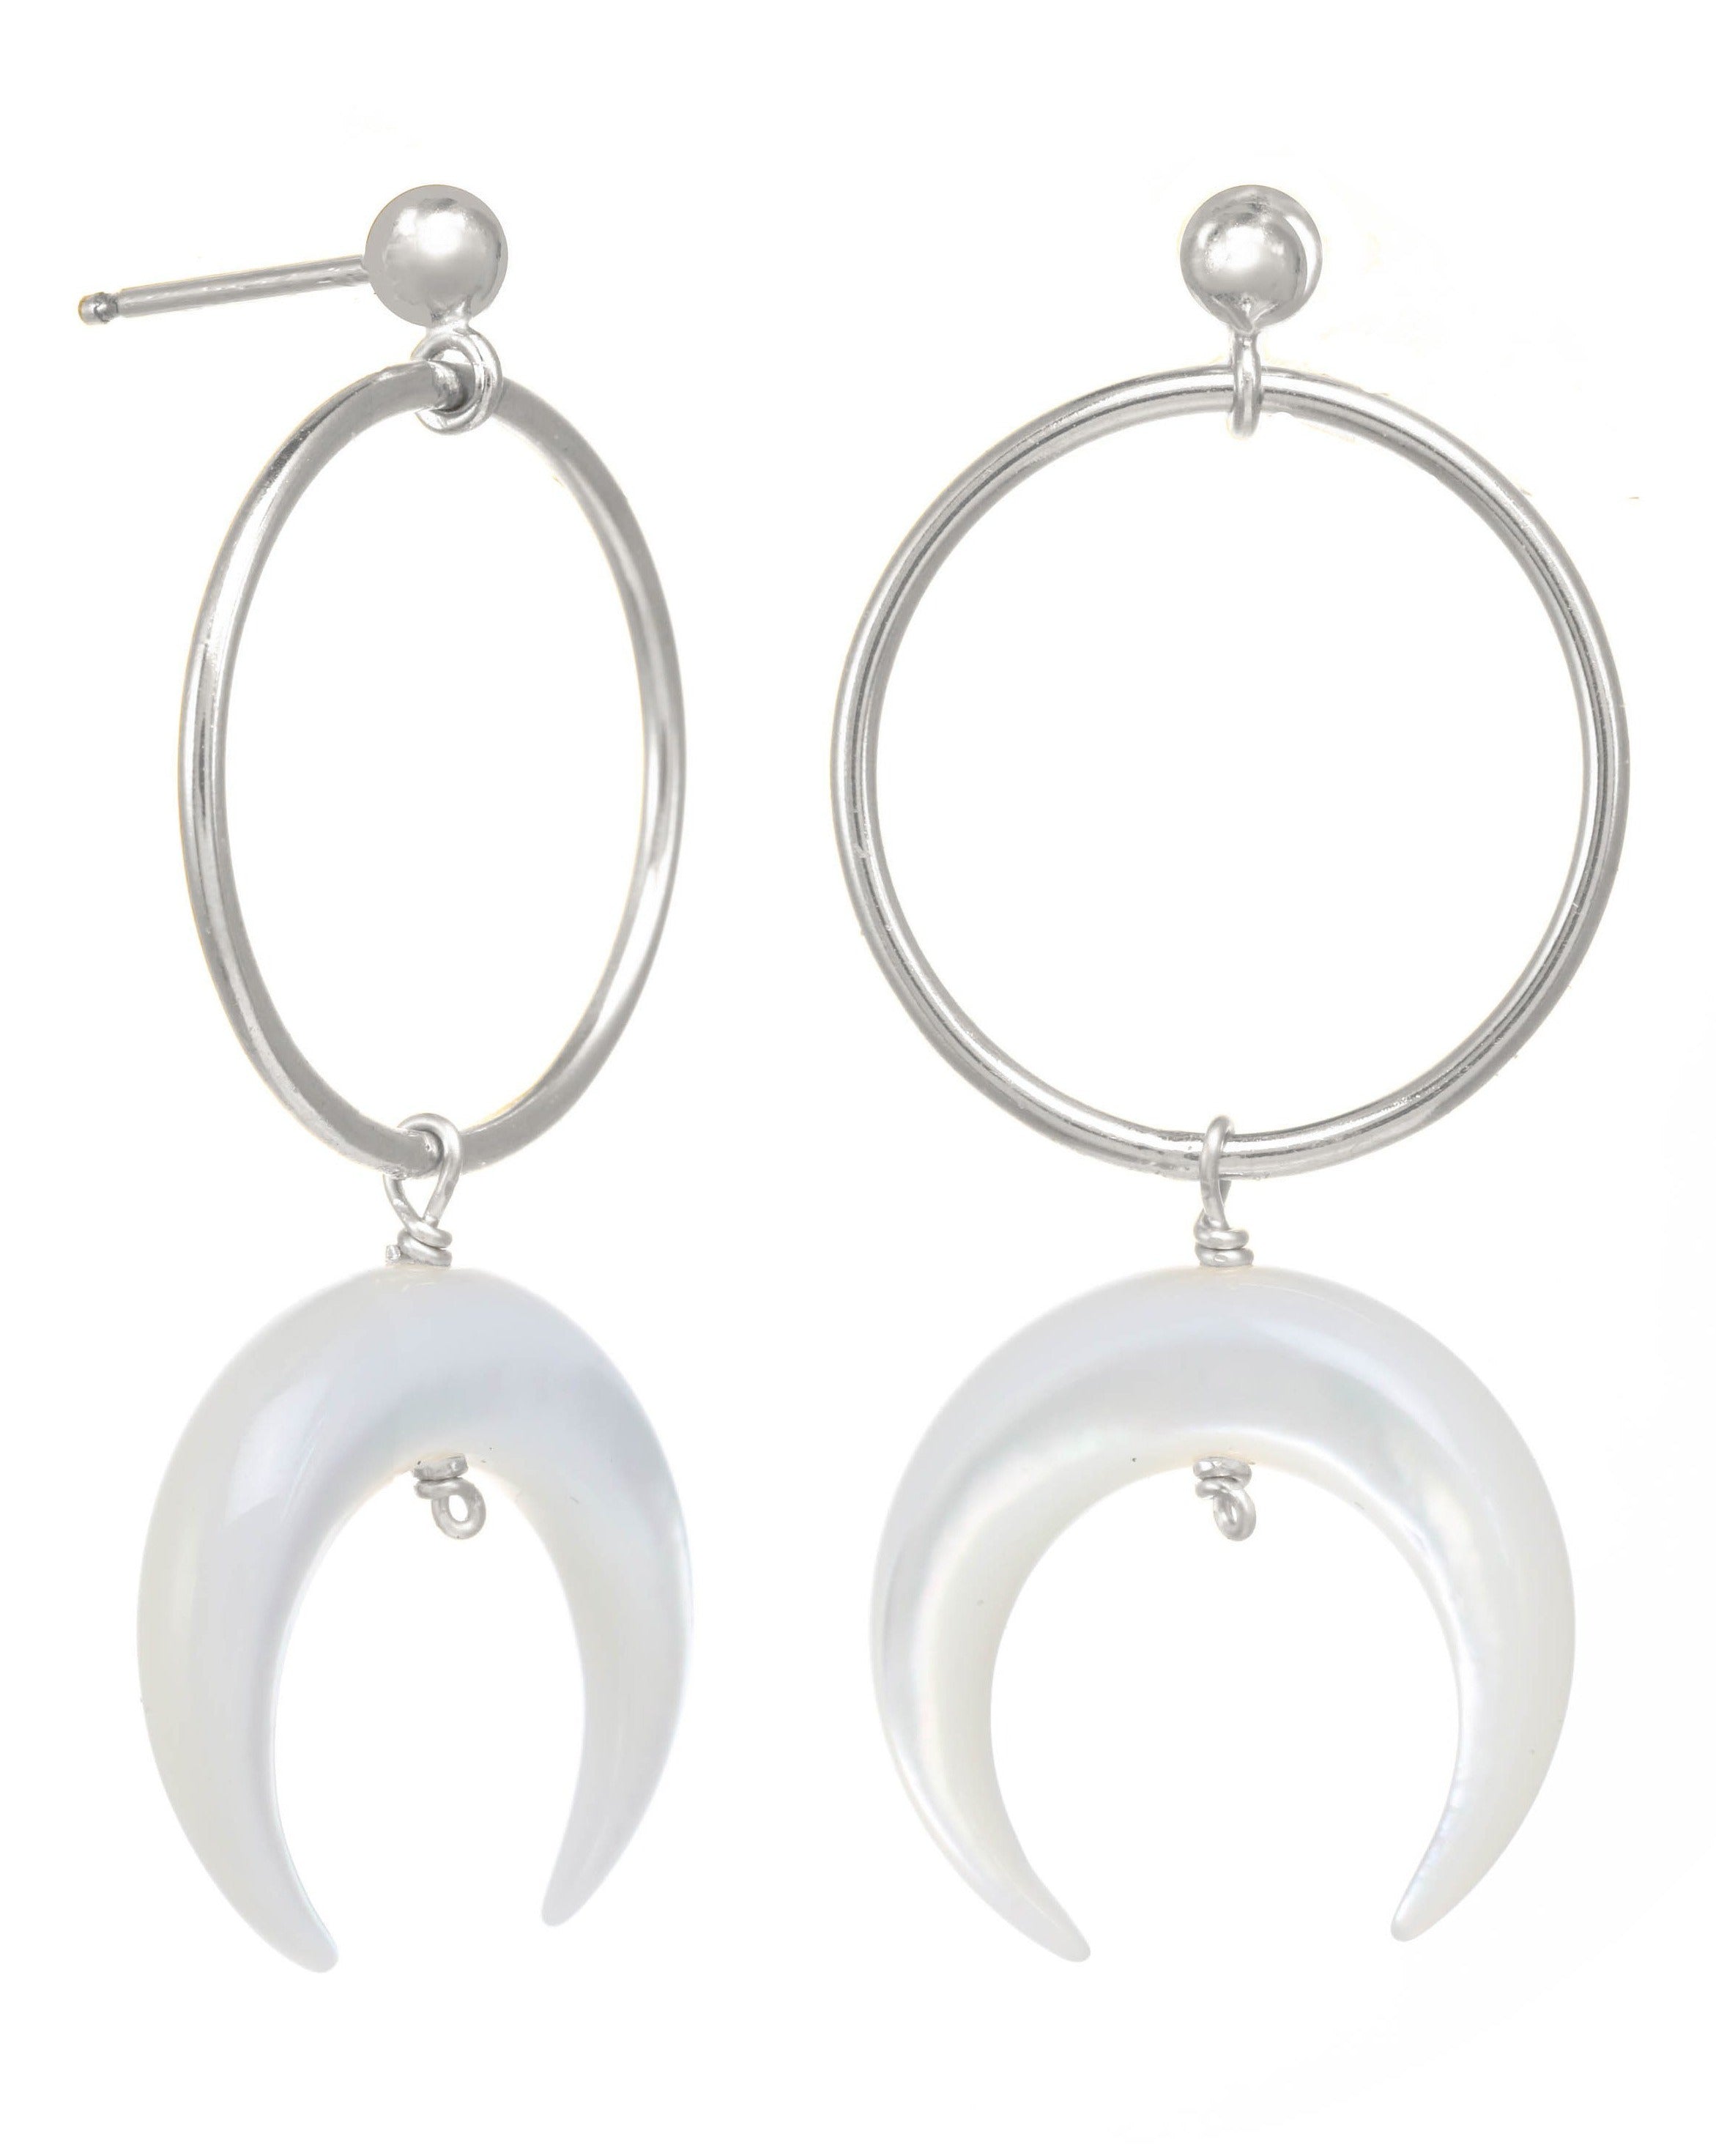 Baques Earrings by KOZAKH. Dangling earrings in Sterling Silver, featuring a hand-carved Mother of Pearl moon charm.